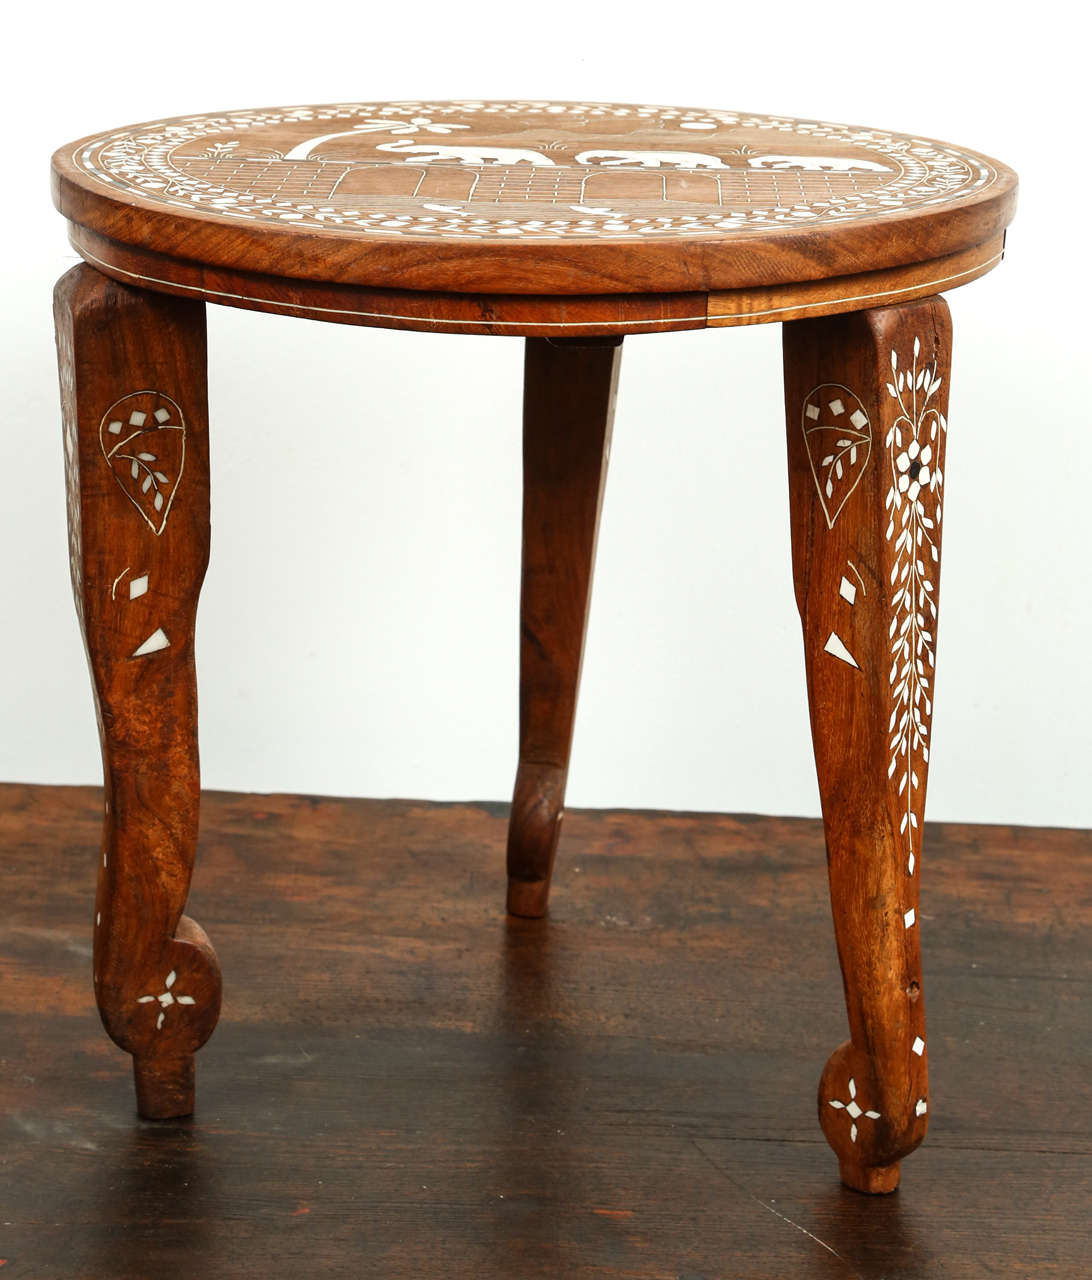 Anglo Indian elegant round wooden side table delicately handcrafted and inlaid with mother-of-pearl. 
Elephants designs on top, bone inlay in Moorish designs and elephant head designs on the three legs.